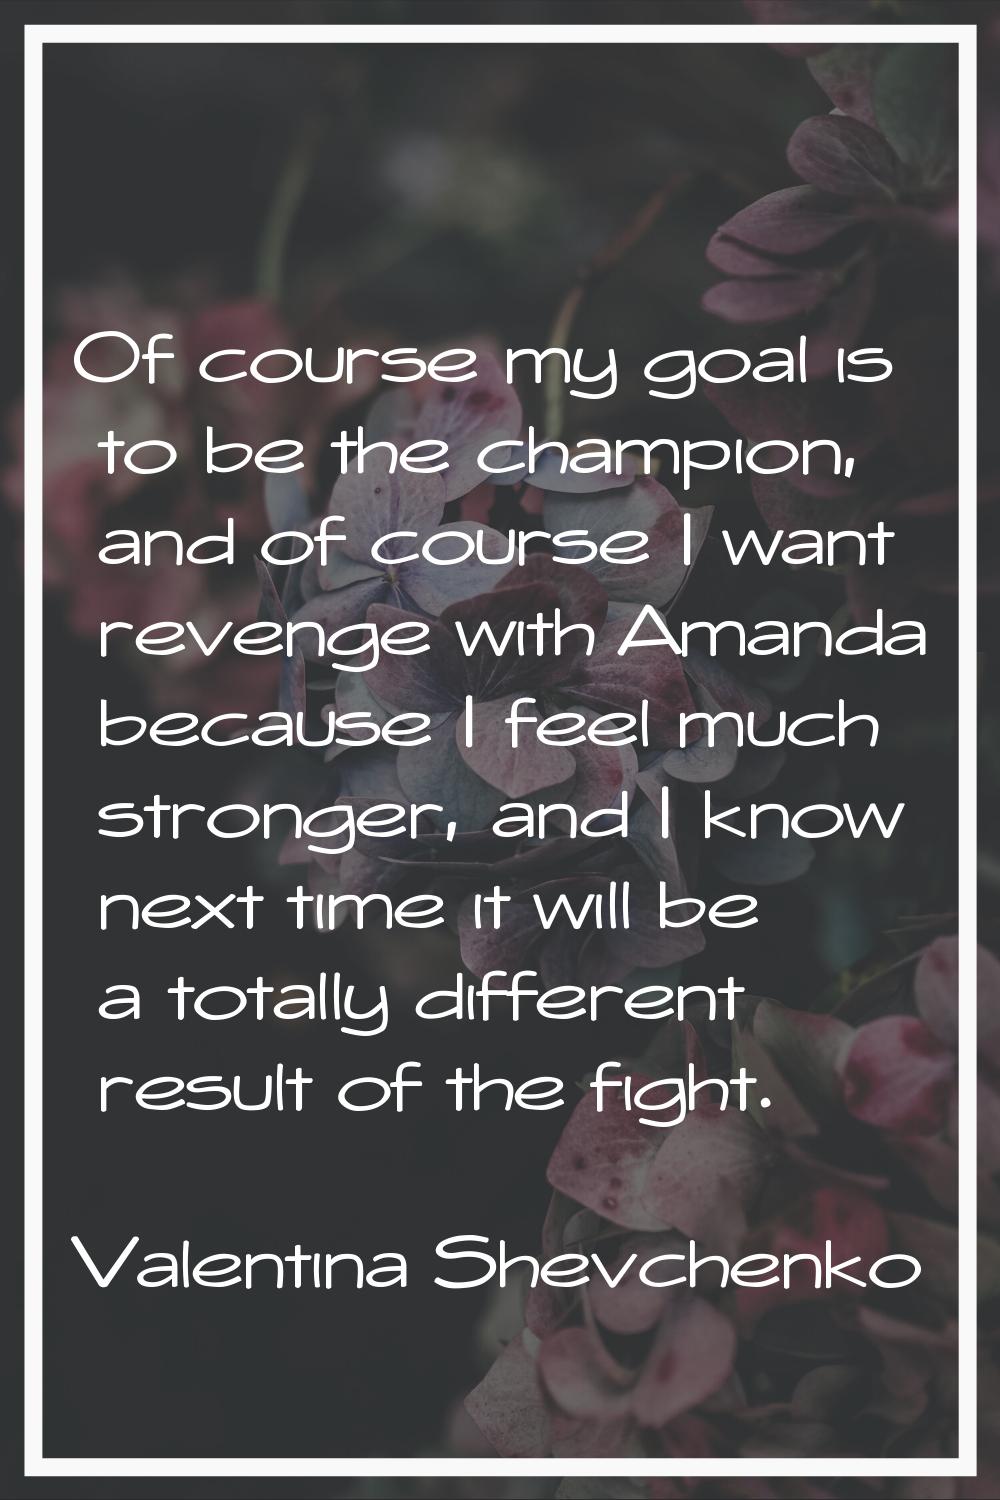 Of course my goal is to be the champion, and of course I want revenge with Amanda because I feel mu